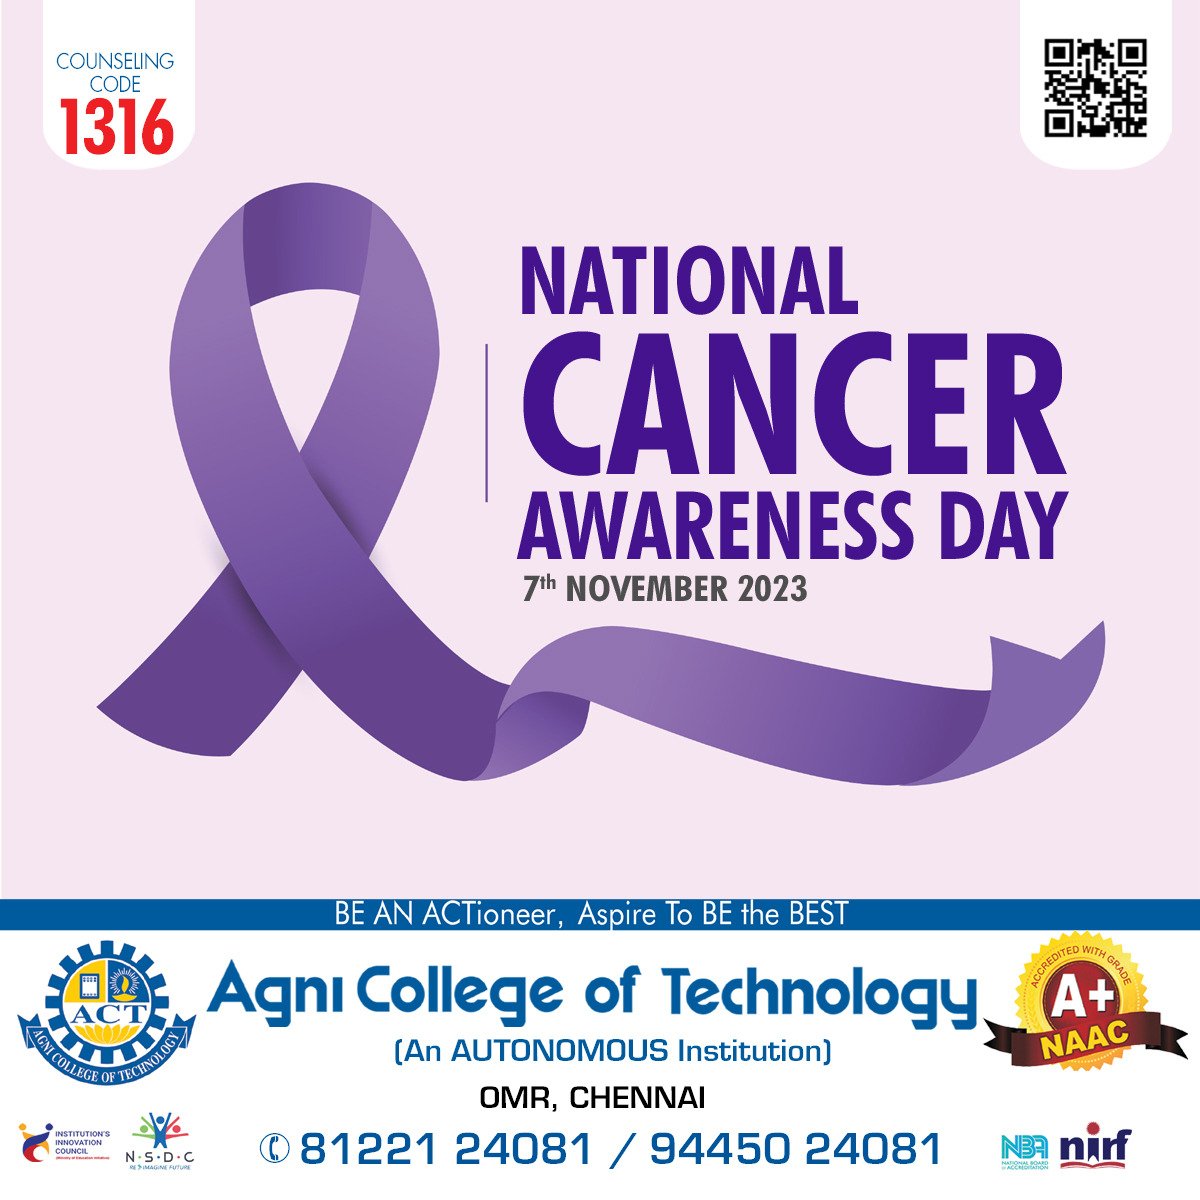 National Cancer Awareness Day

#cancerawareness #agnicollegeoftechnology #cancer #engineeringadmissions #EngineeringExcellence